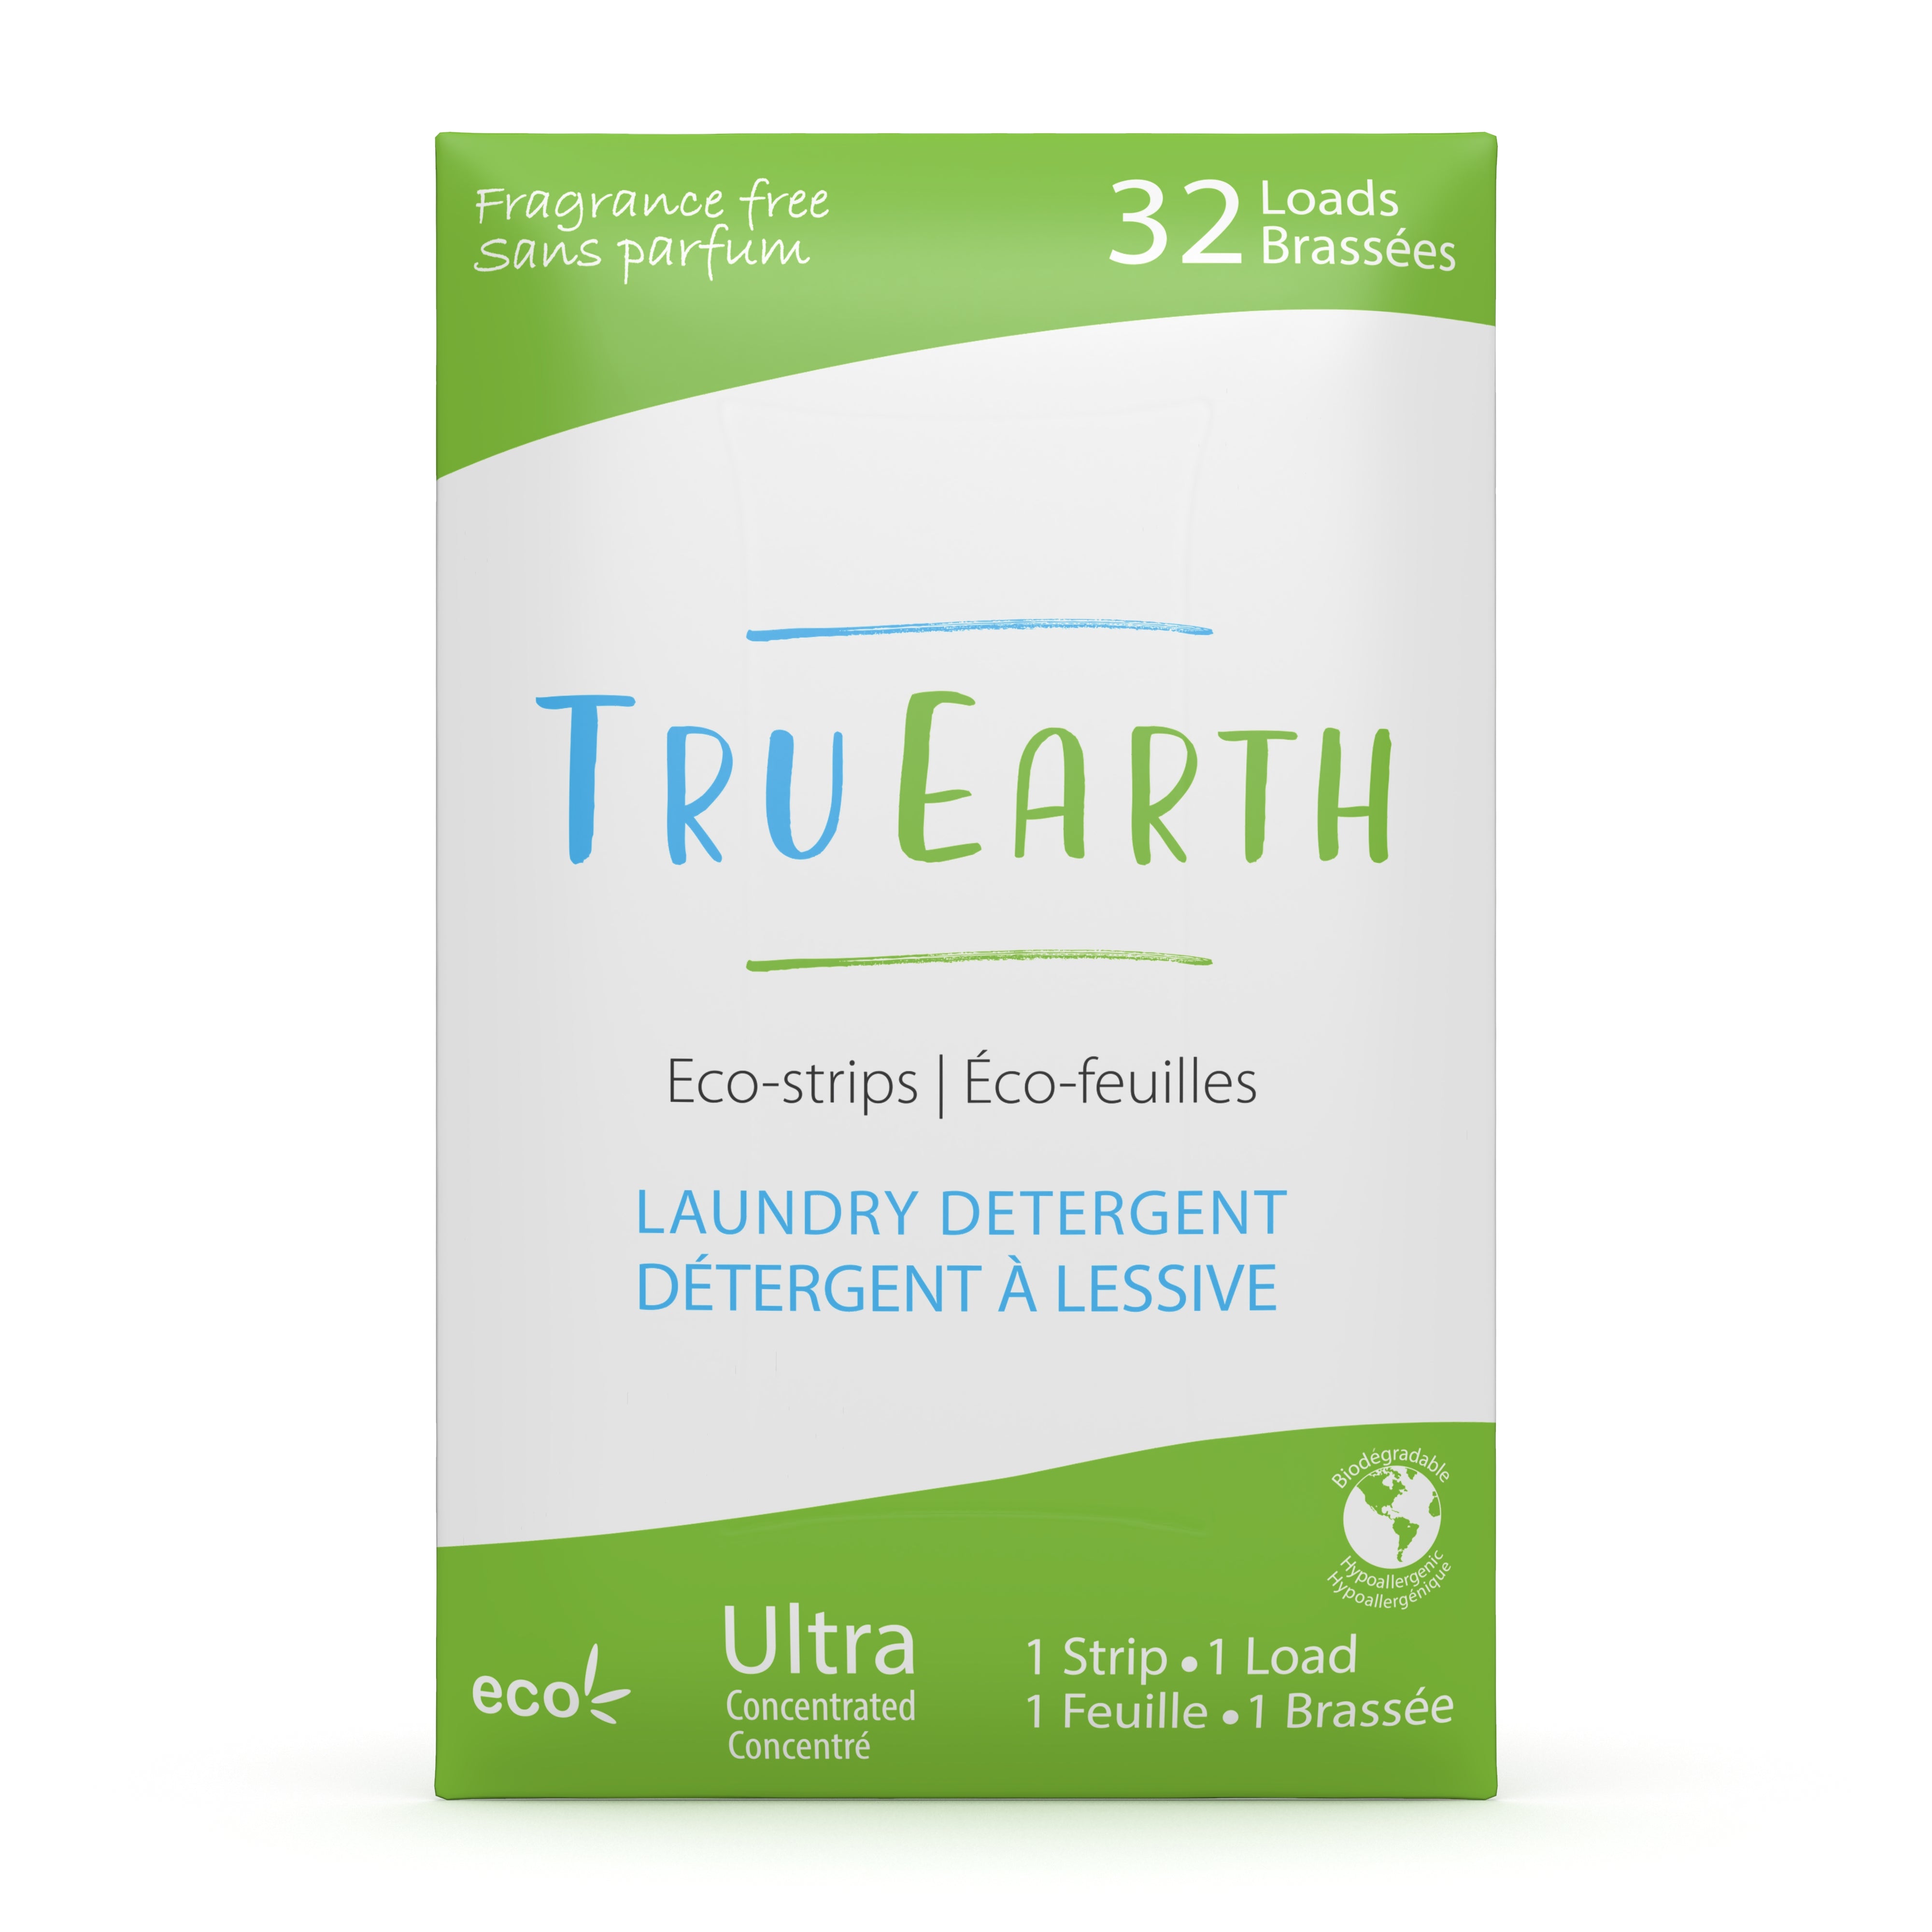 Tru Earth Eco-strips Laundry Detergent for Sustainable Zero-Waste Laundry; Fragrance Free Laundry Soap 32 Loads 